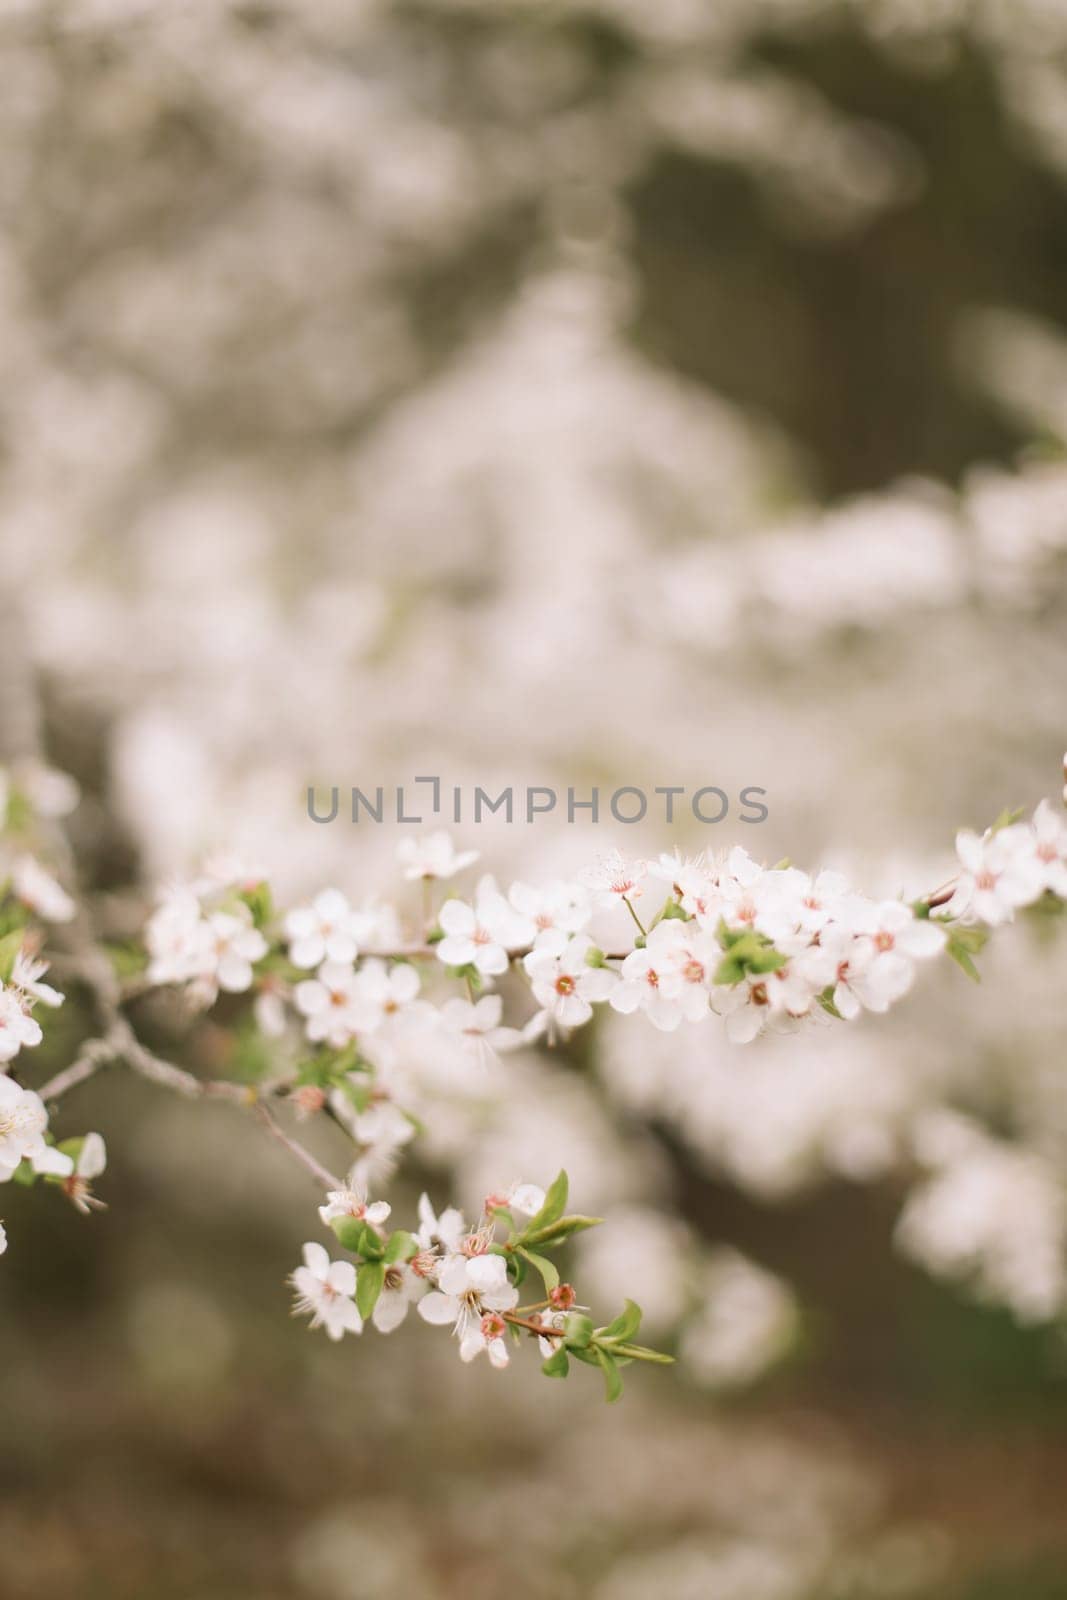 Blur spring blossom background. Spring banner, branches of blossoming cherry on nature outdoors. Dreamy romantic image spring, landscape panorama, copy space.